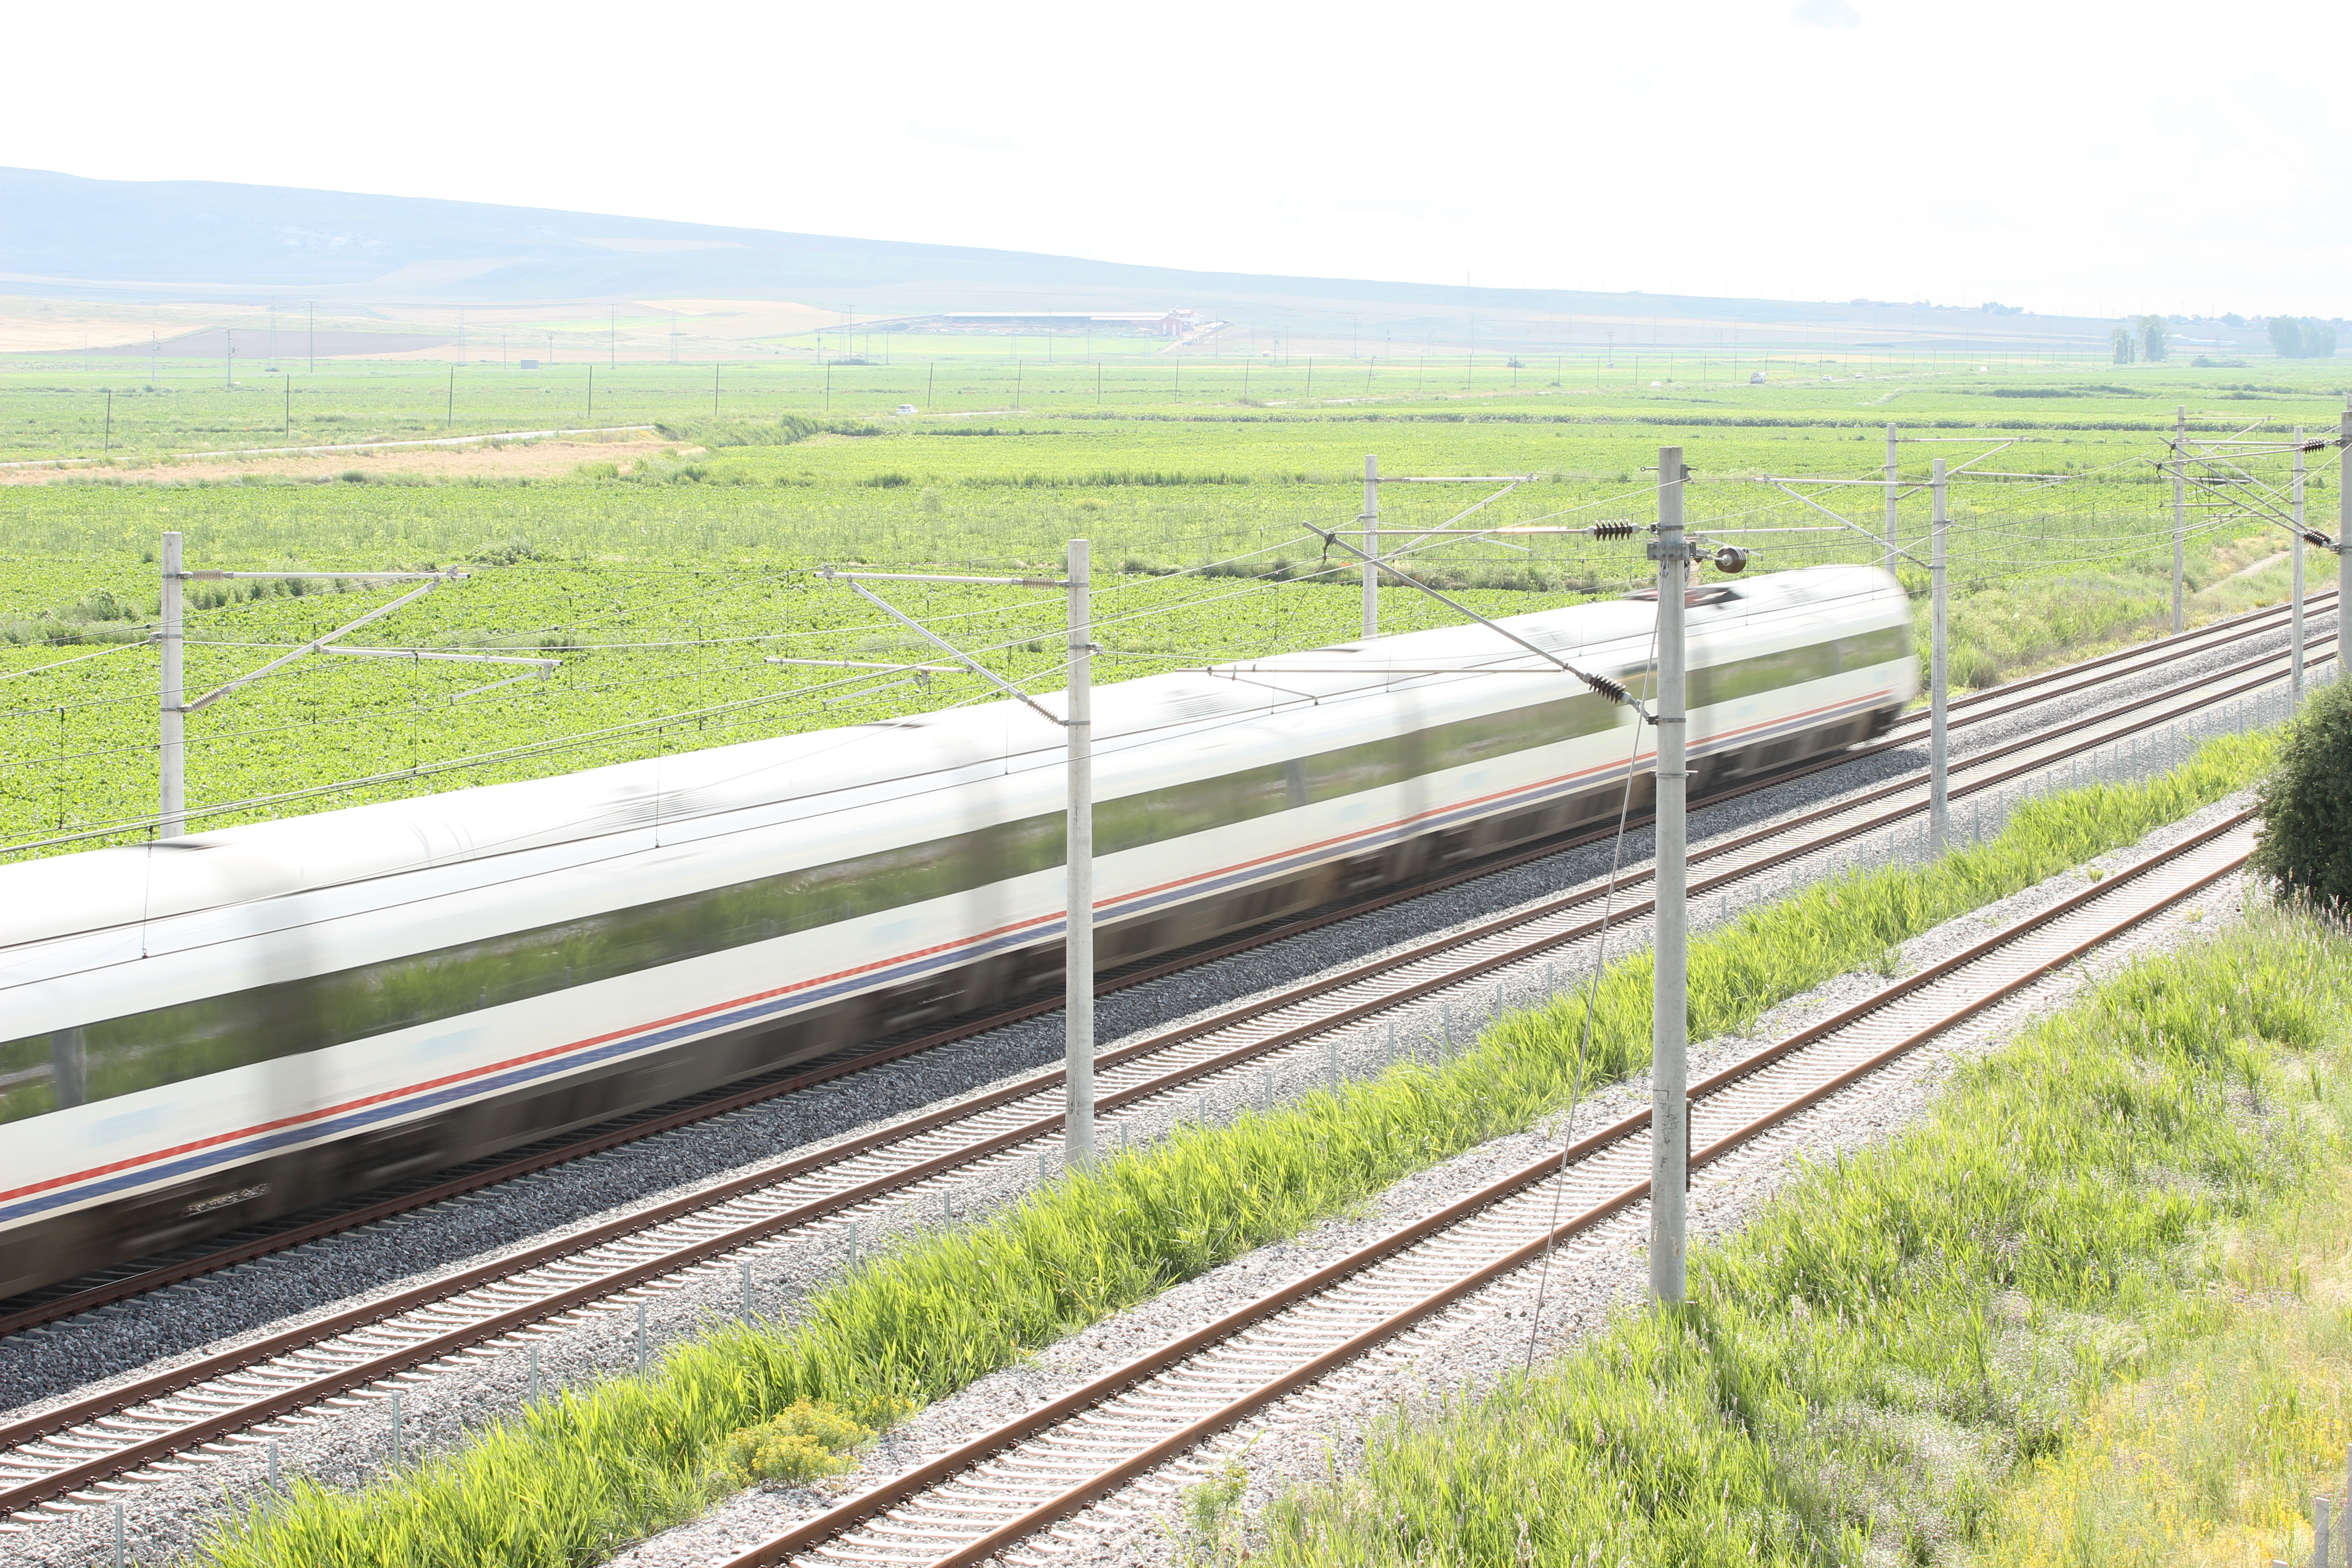 Thales’ technology plays a key role in high speed lines and suburban networks of Türkiye